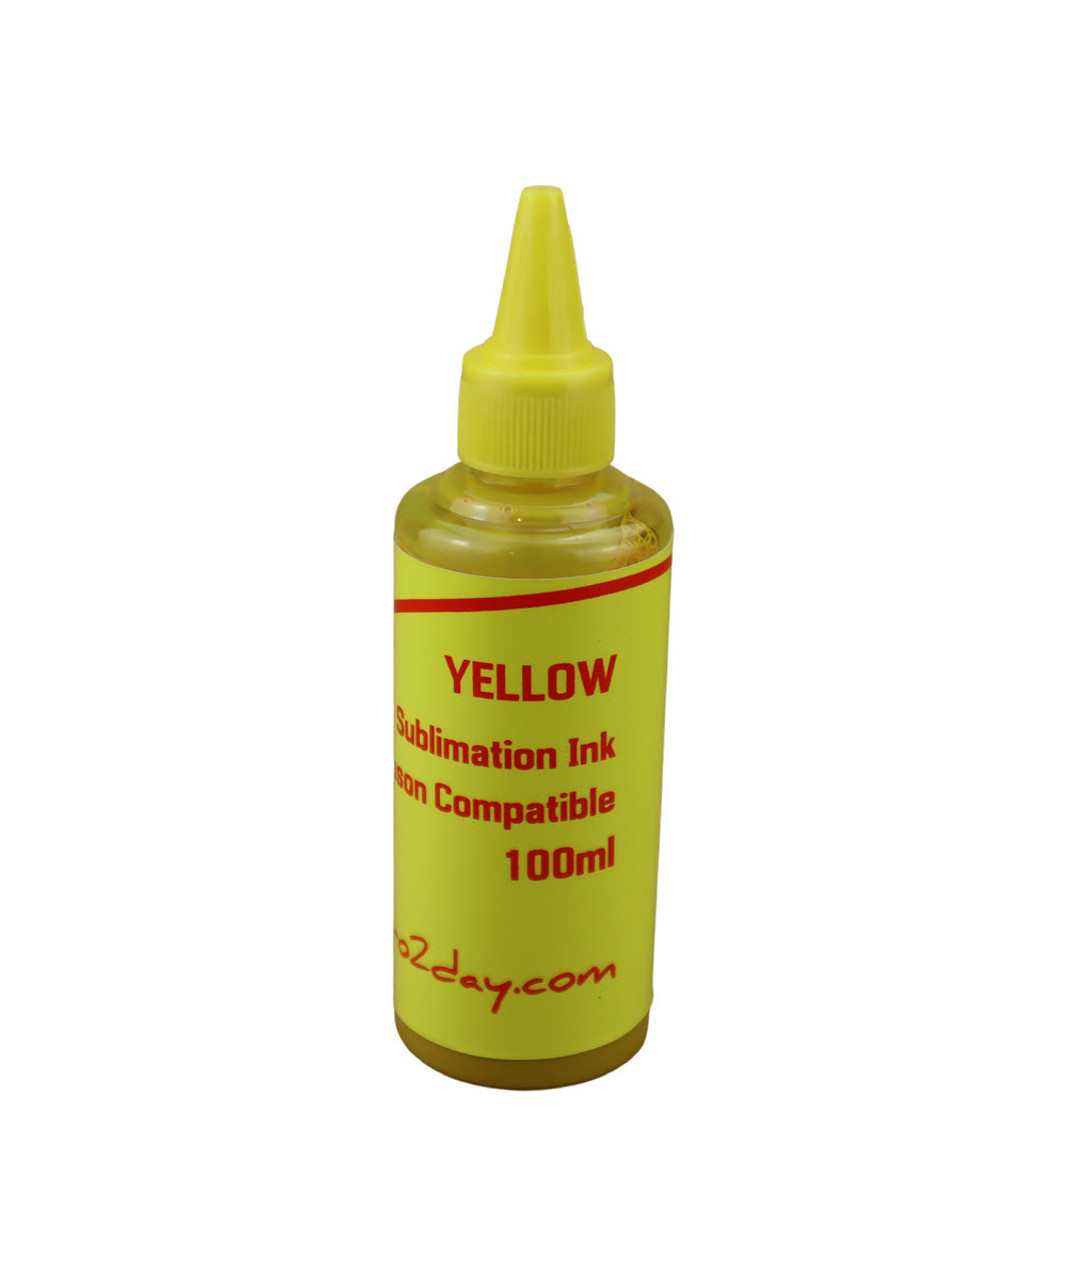 Yellow 100ml Bottle Dye Sublimation Ink for Epson WorkForce WF-7210, WorkForce WF-7710, WorkForce WF-7720 Printers